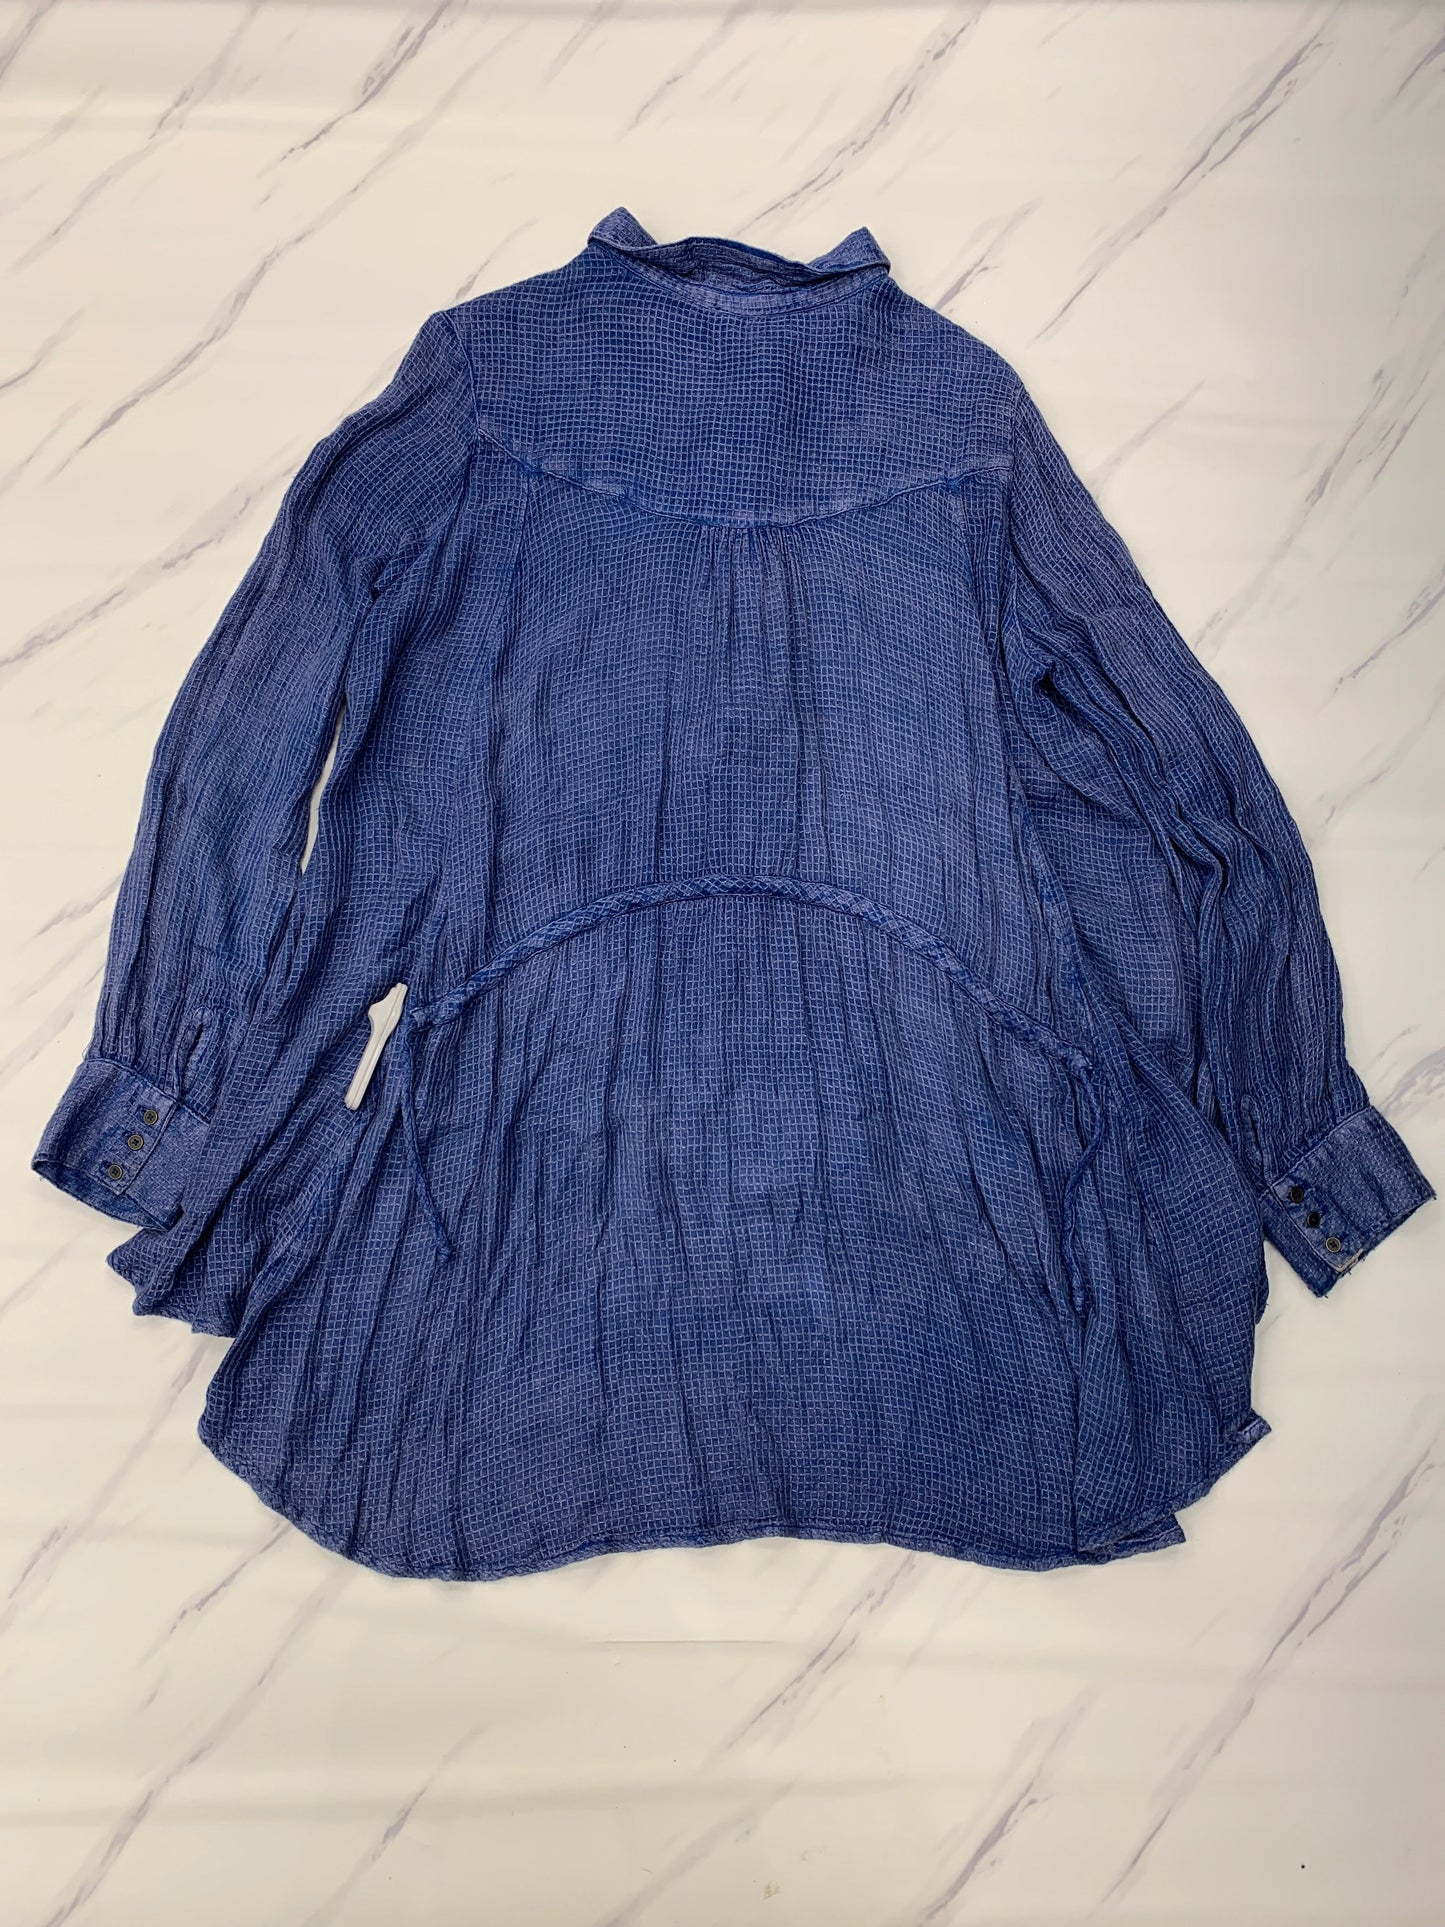 Top Long Sleeve Free People, Size L